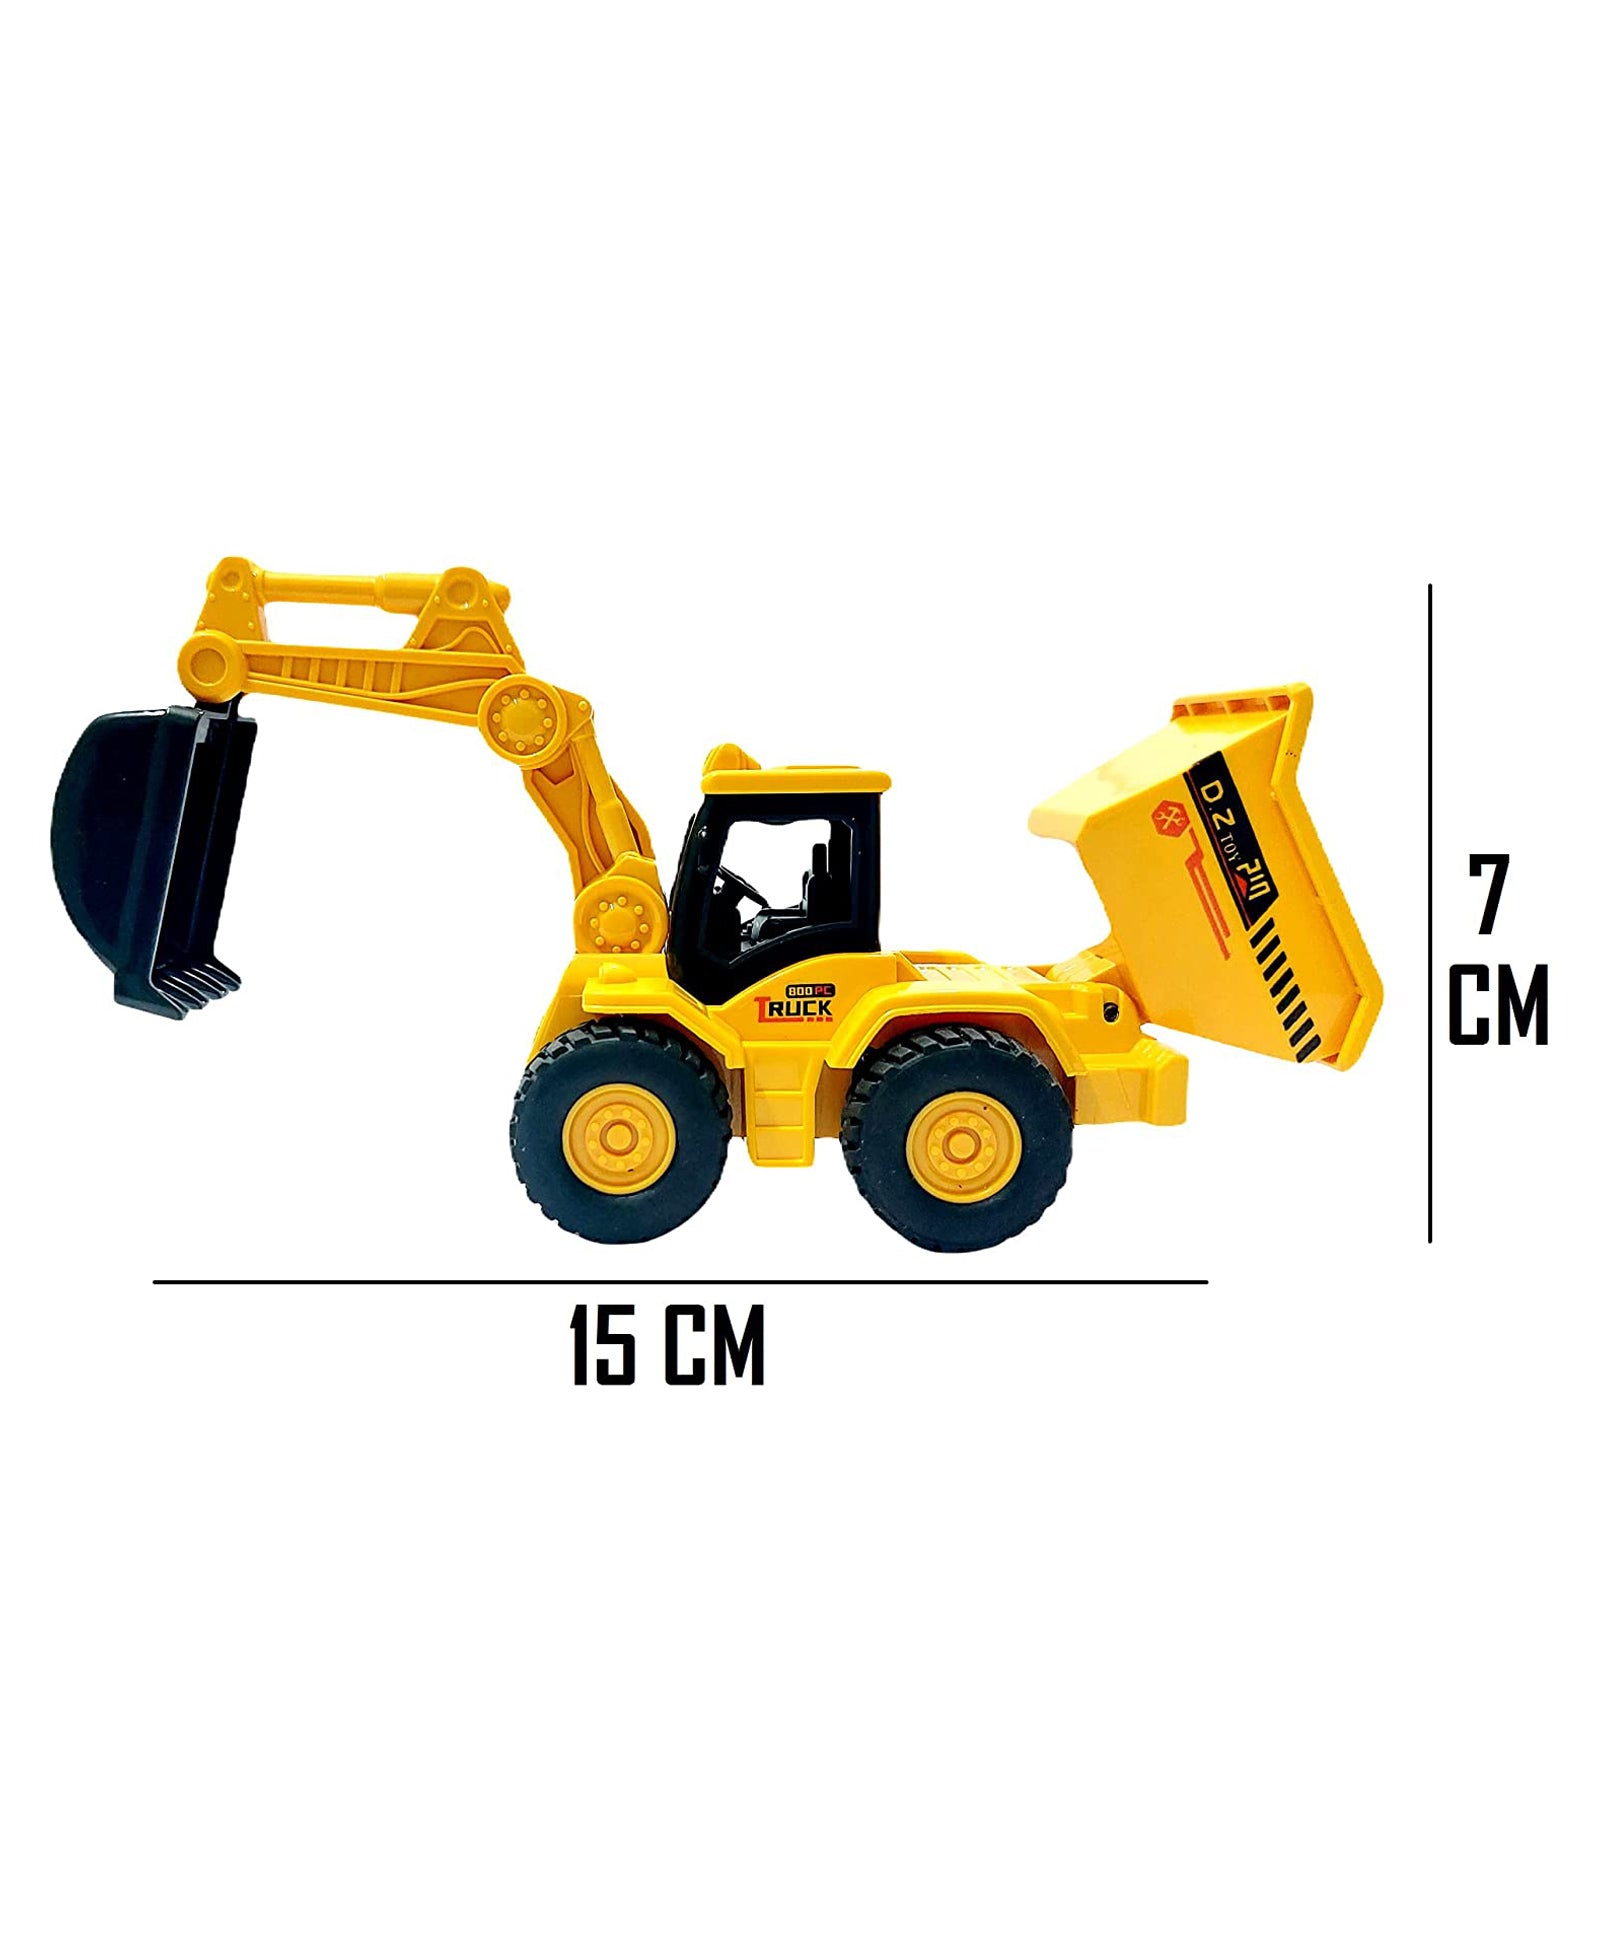 Friction Powered Construction Vehicles Pack of 2